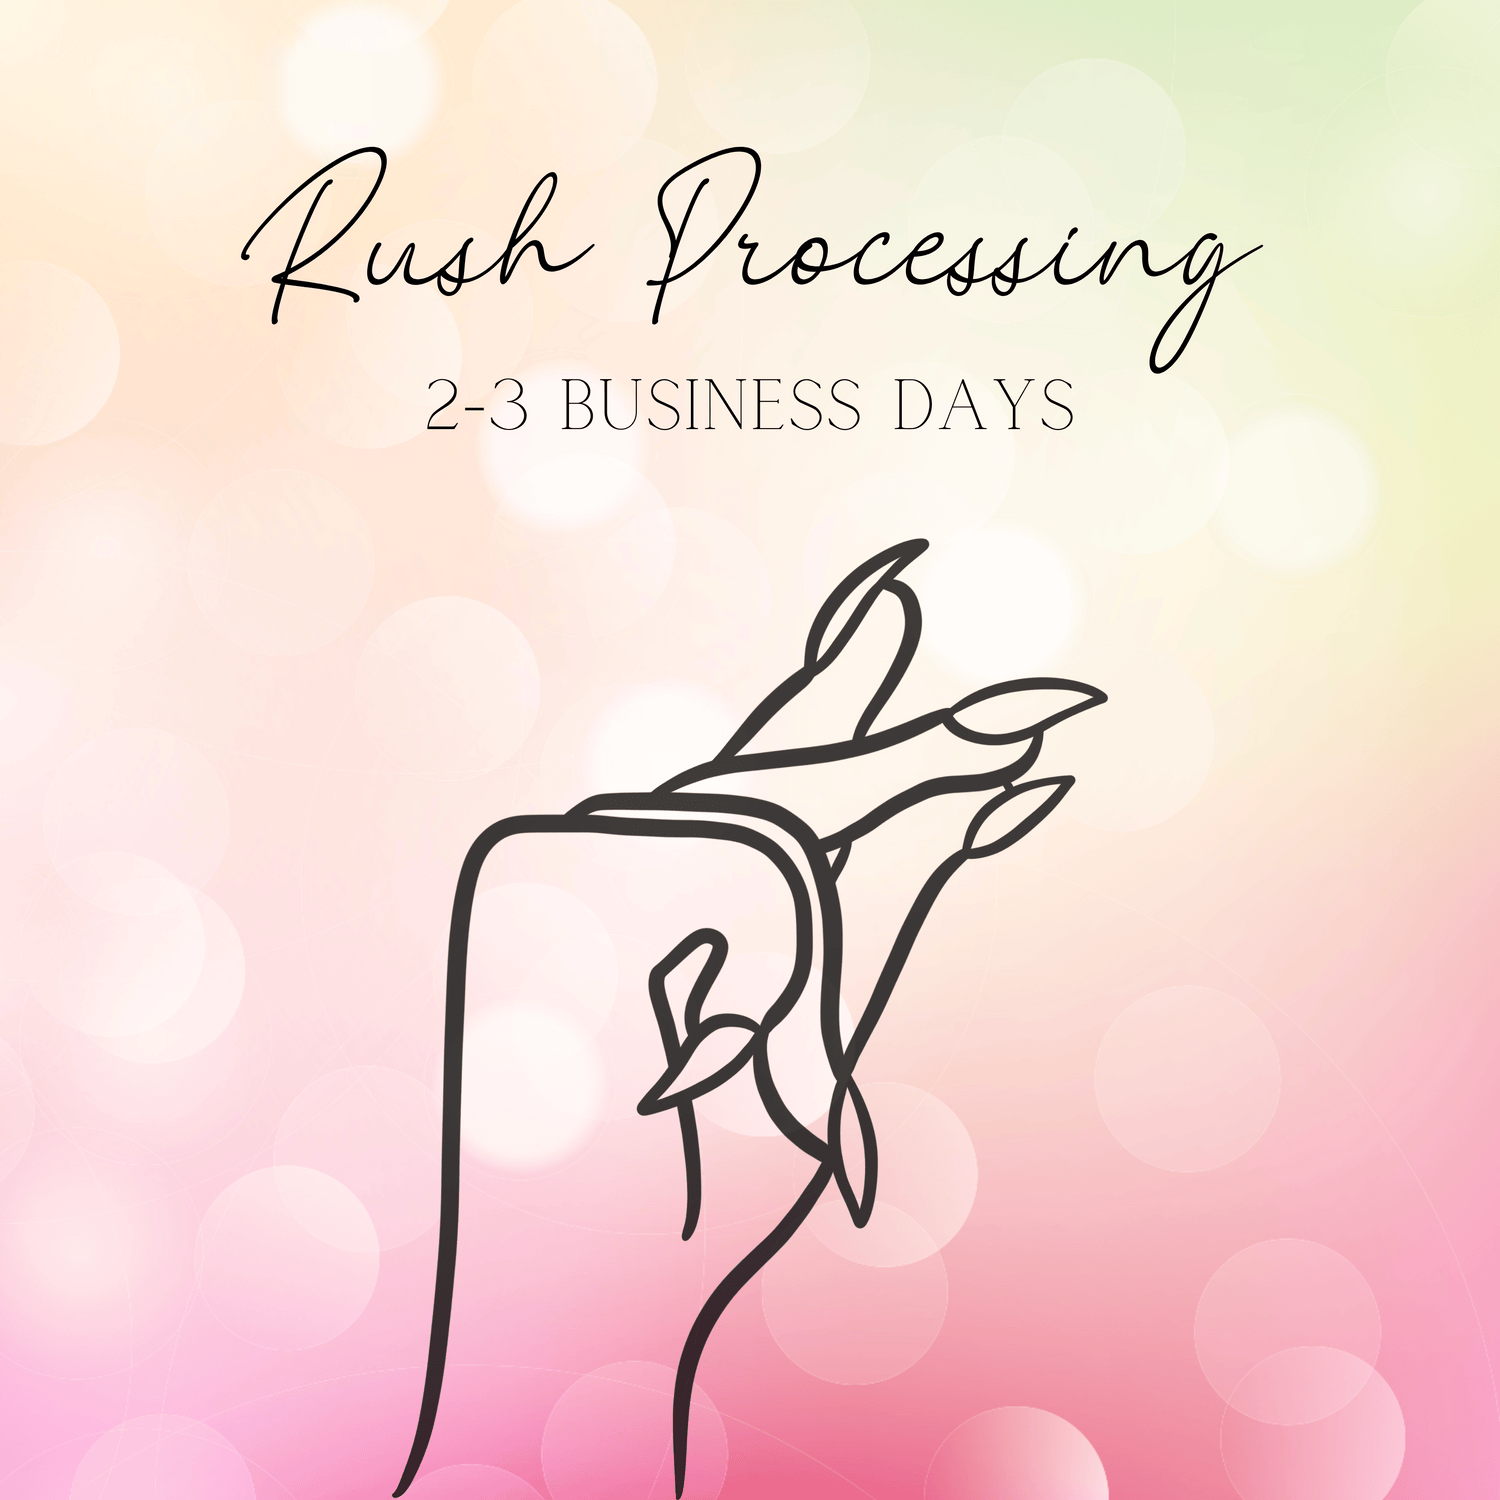 Rush Processing (2-3 Business Days)